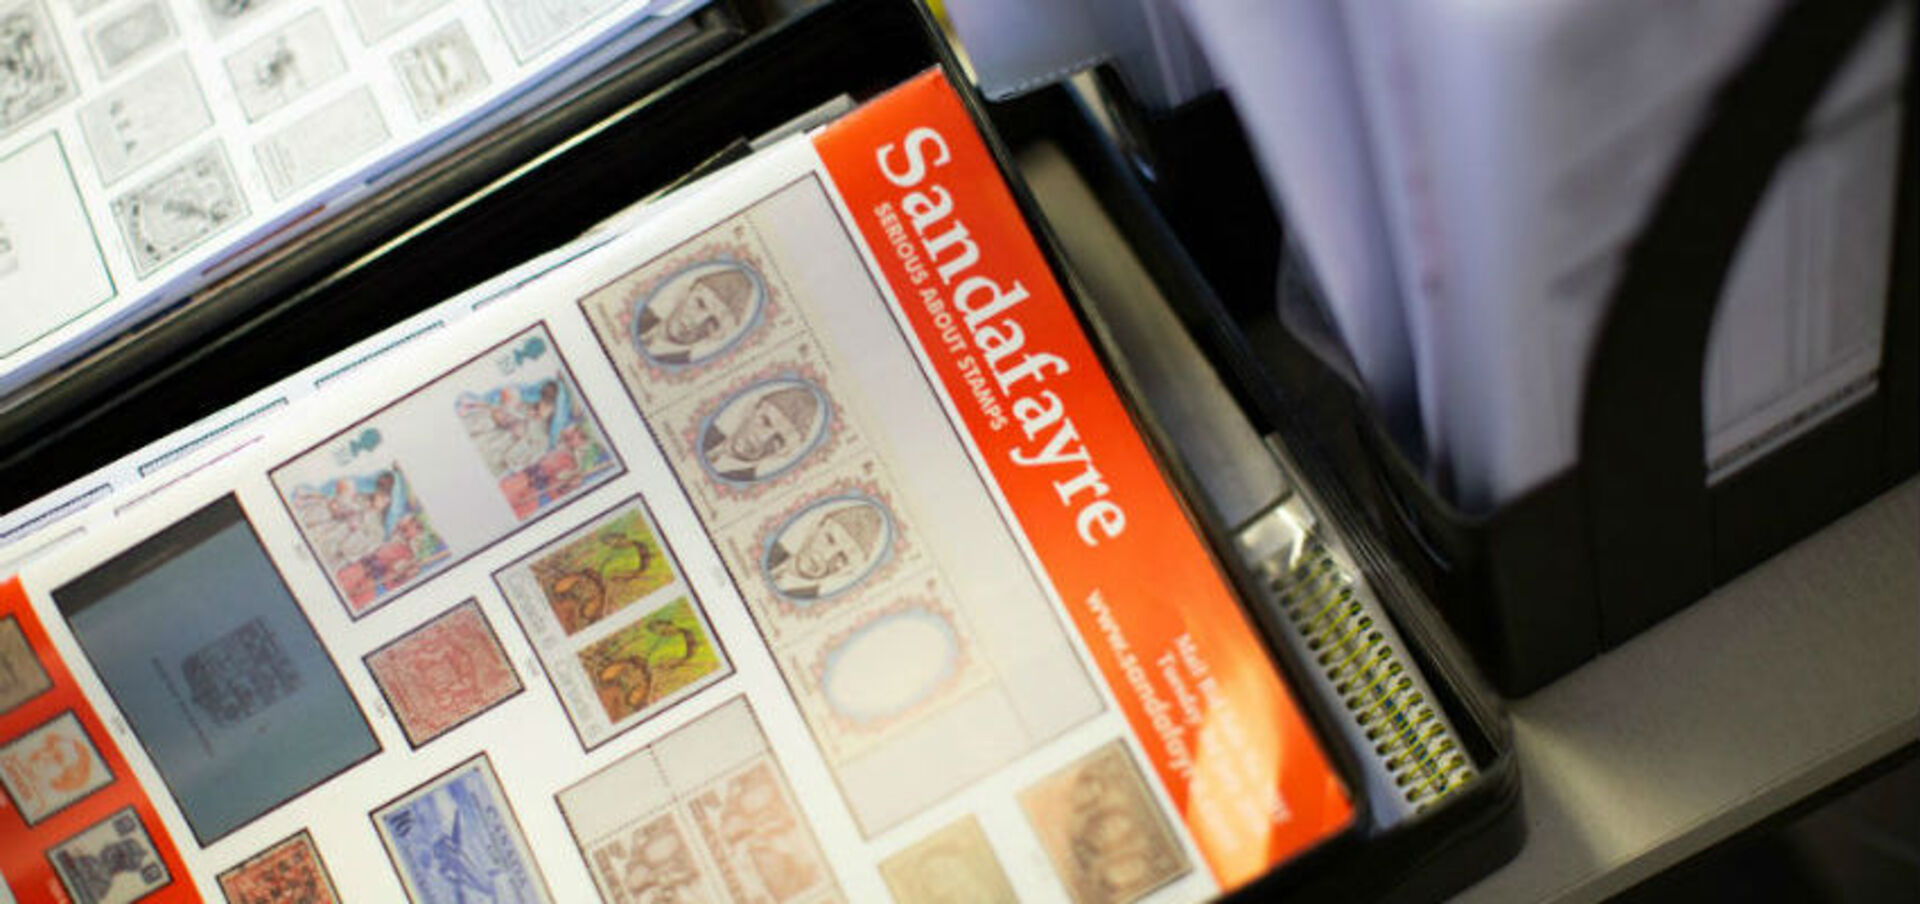 Sandafayre catalogue and stamp collections